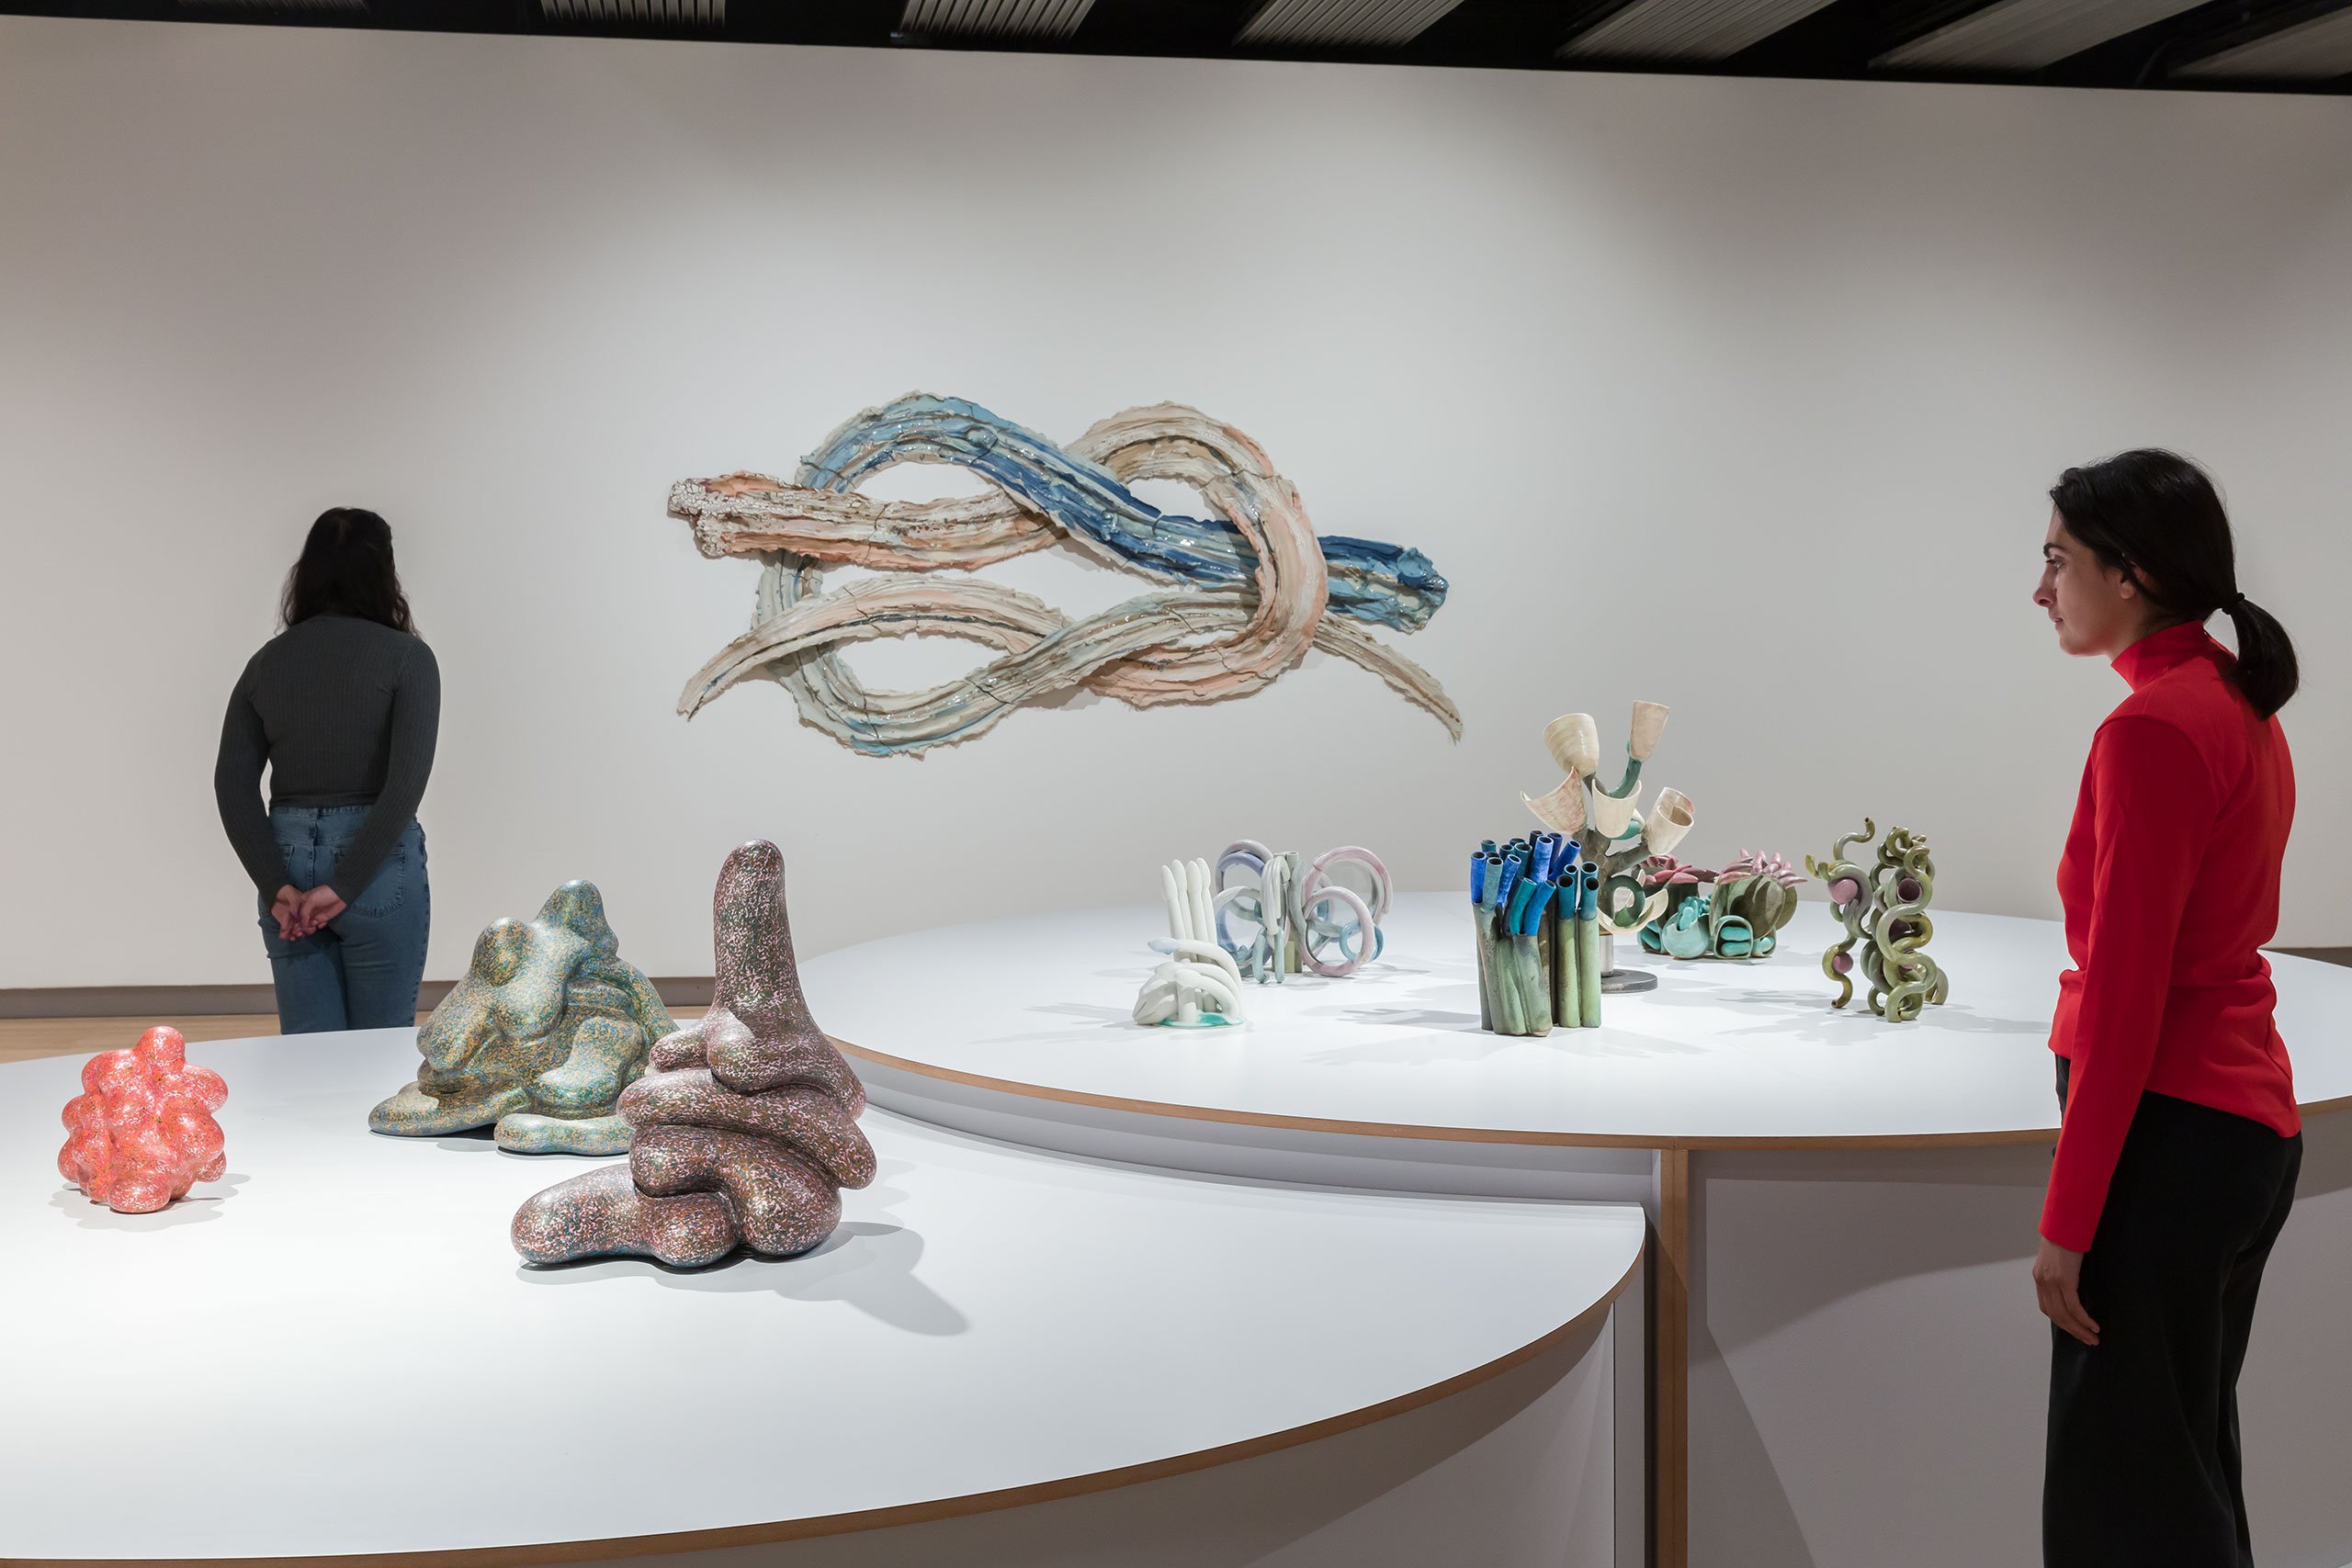 Installation view of Ken Price, Brie Ruais and Beate Kuhn, Strange Clay: Ceramics in Contemporary Art at the Hayward Gallery (26 October 2022 - 8 January 2023). Photo: Mark Blower. Courtesy the Hayward Gallery.